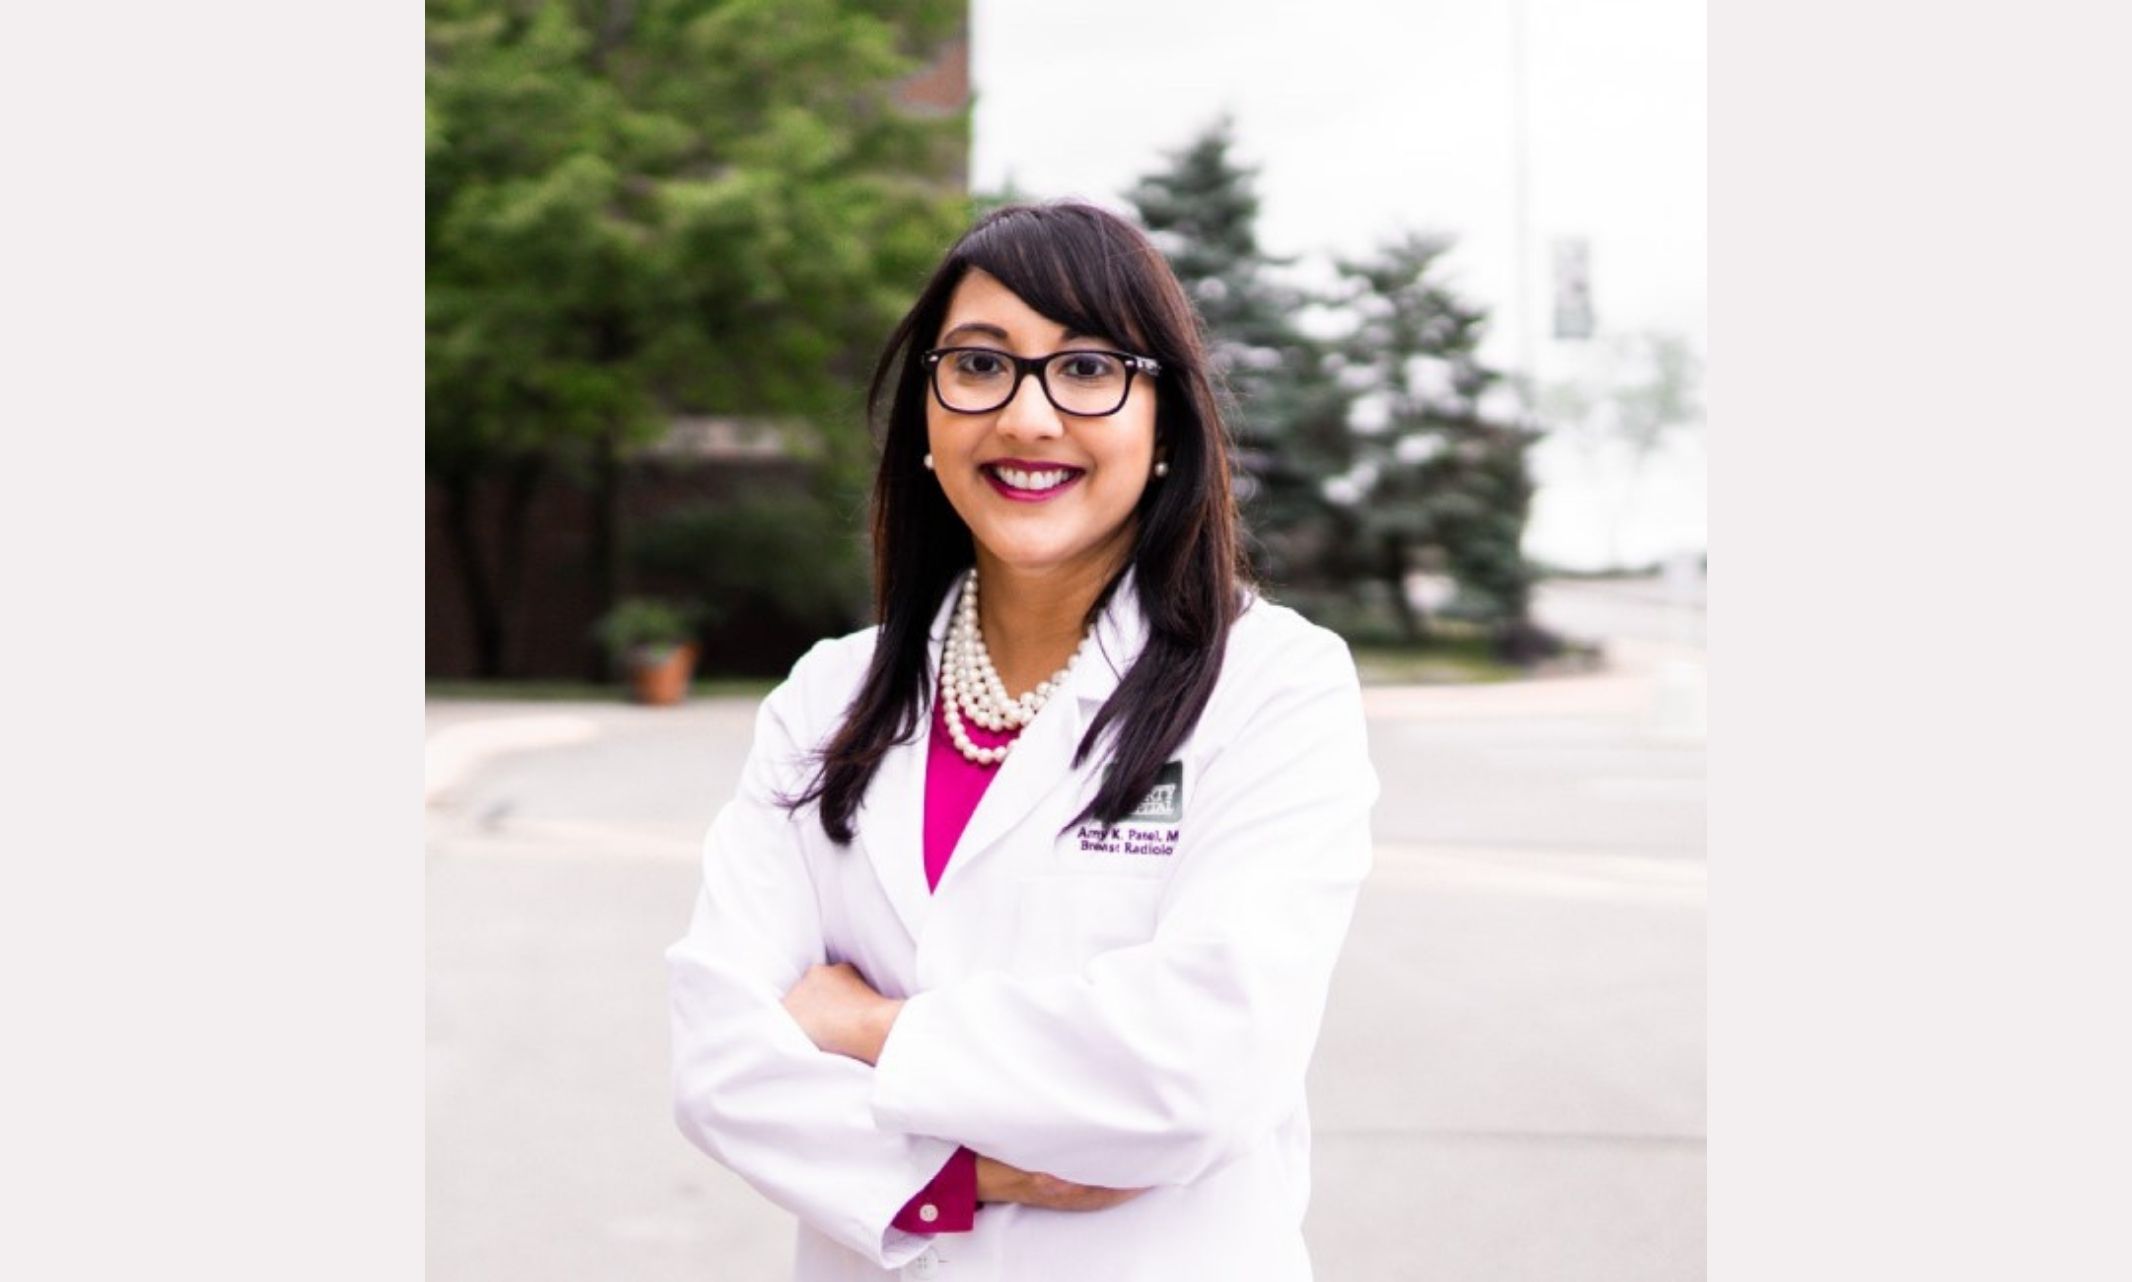 UMKC alum Dr. Amy Patel leads breast imaging center at local hospital